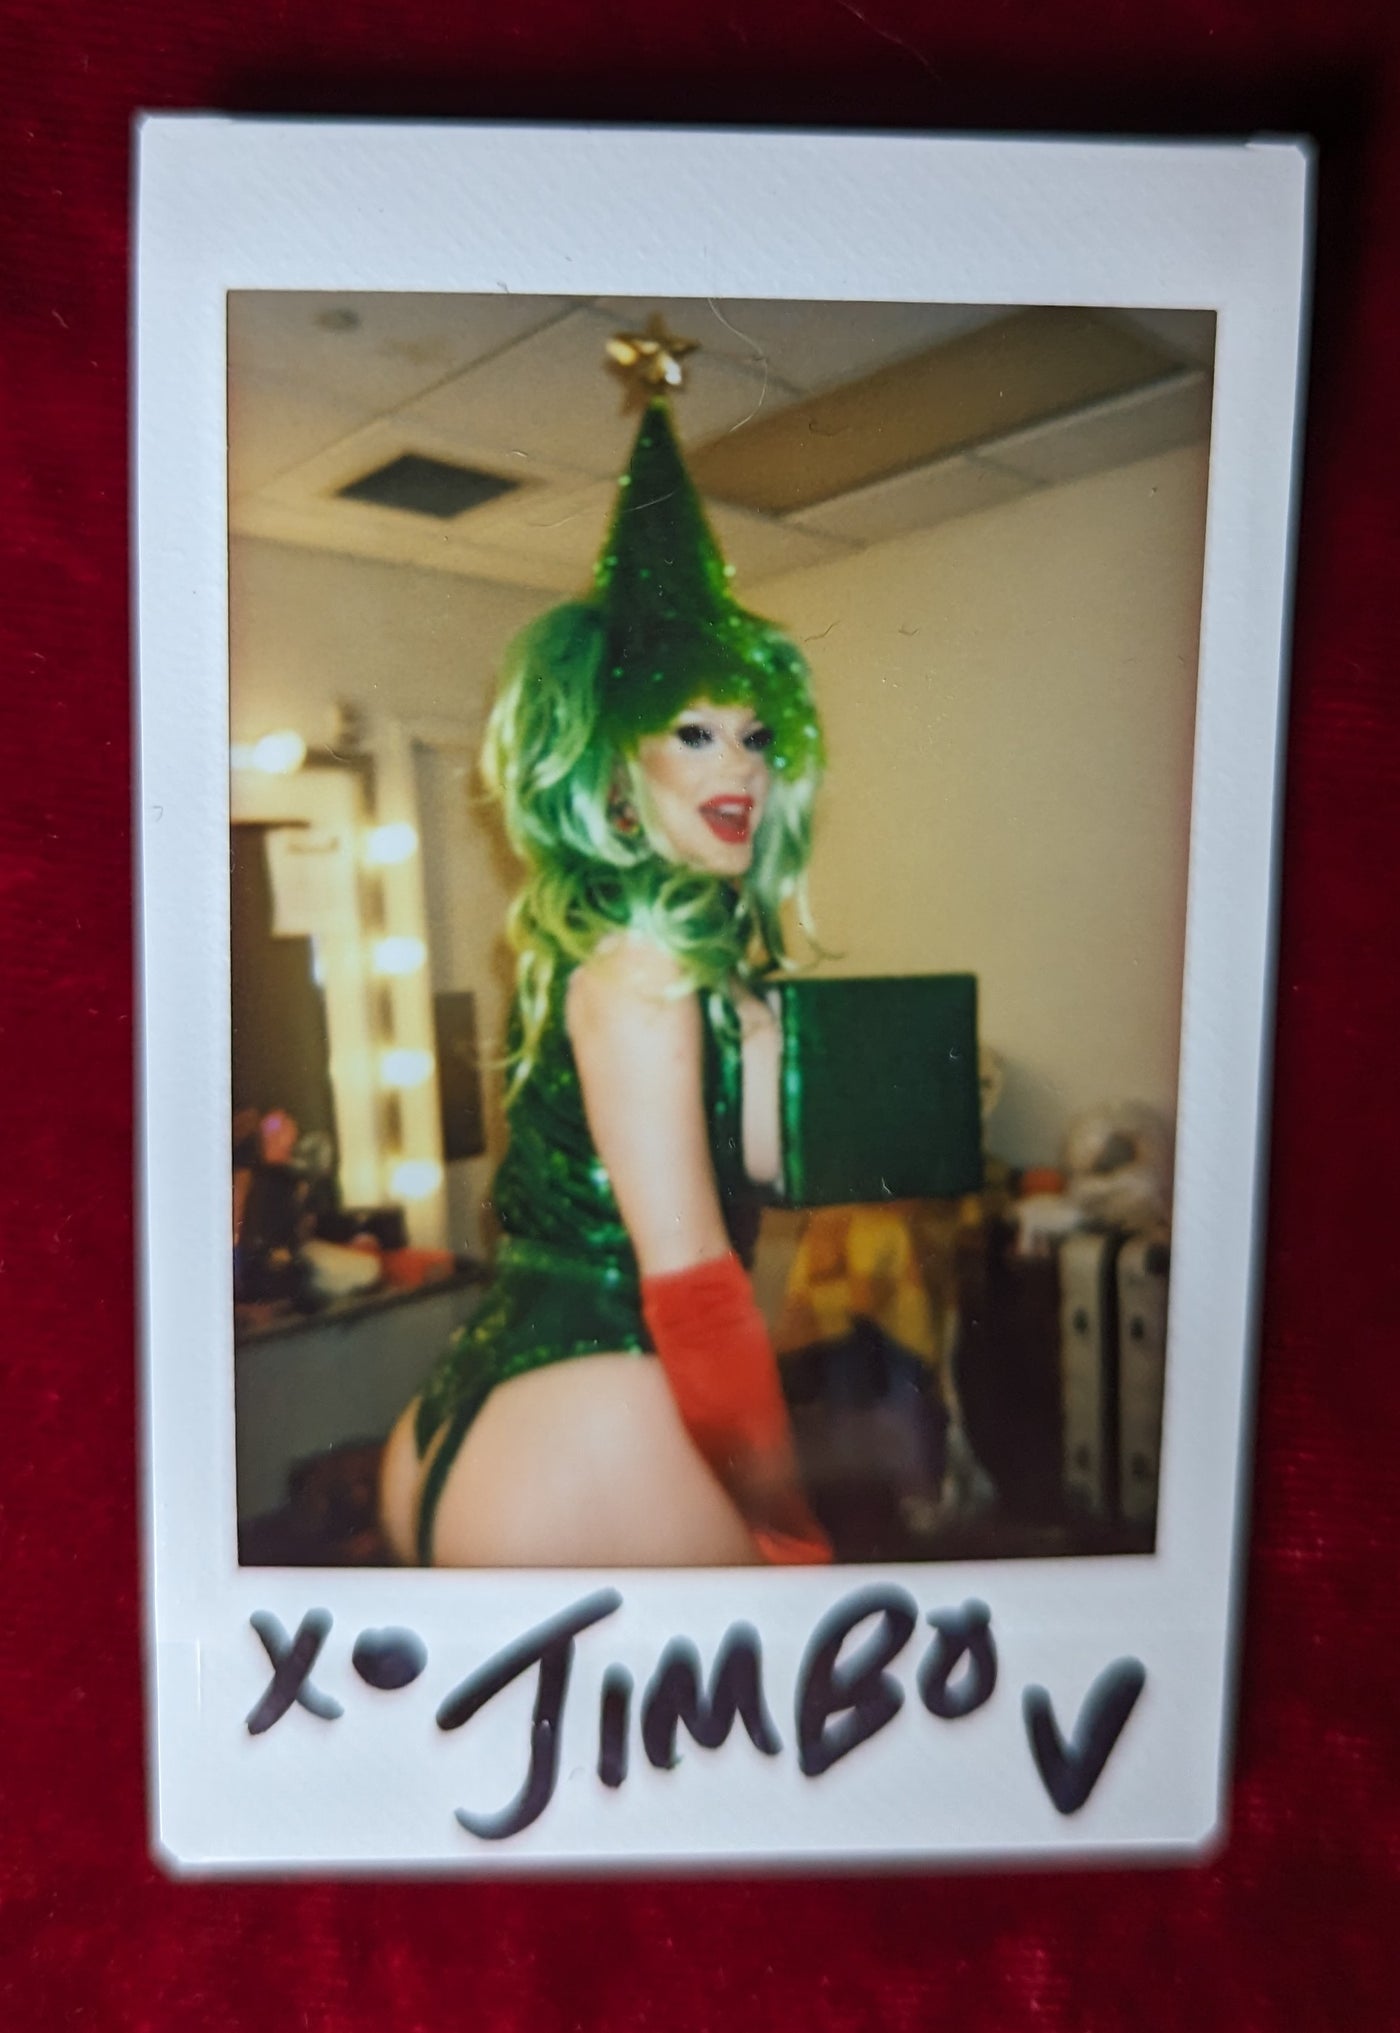 XMAS TOUR POLAROIDS - It's a picture of my tits in a box!